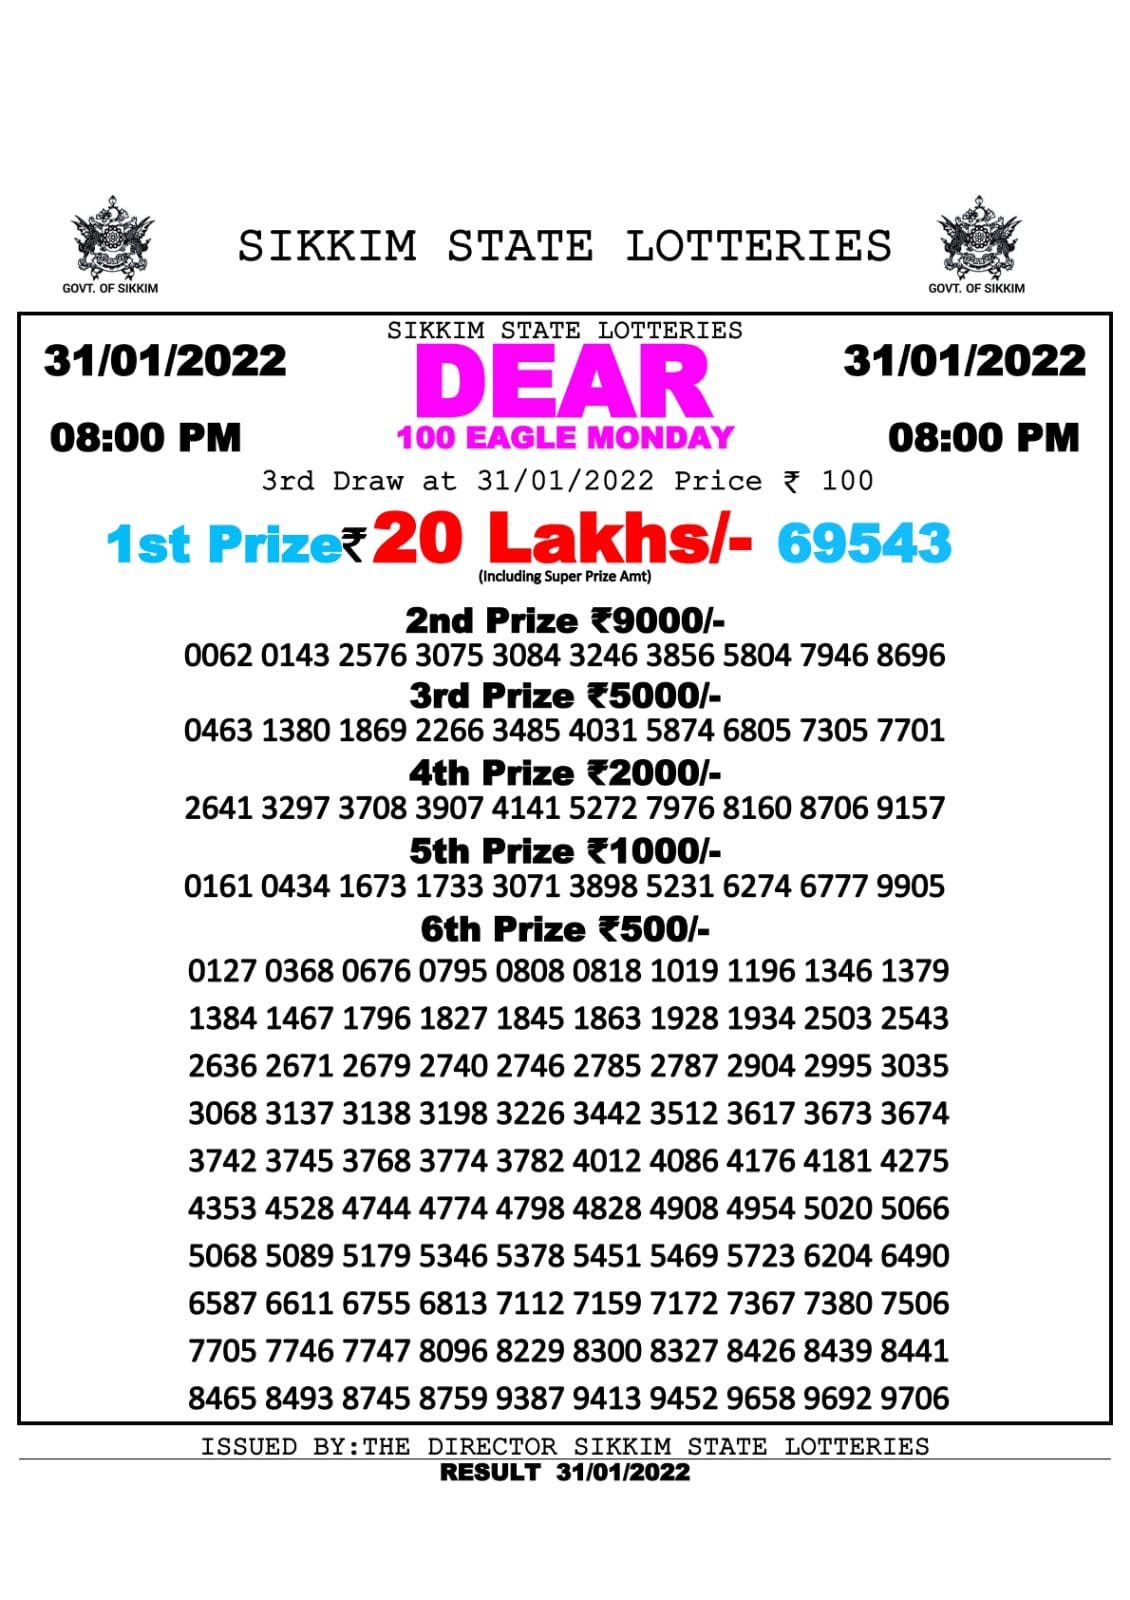 DEAR 100 WEEKLY RESULT 8.00PM 31.01.2022